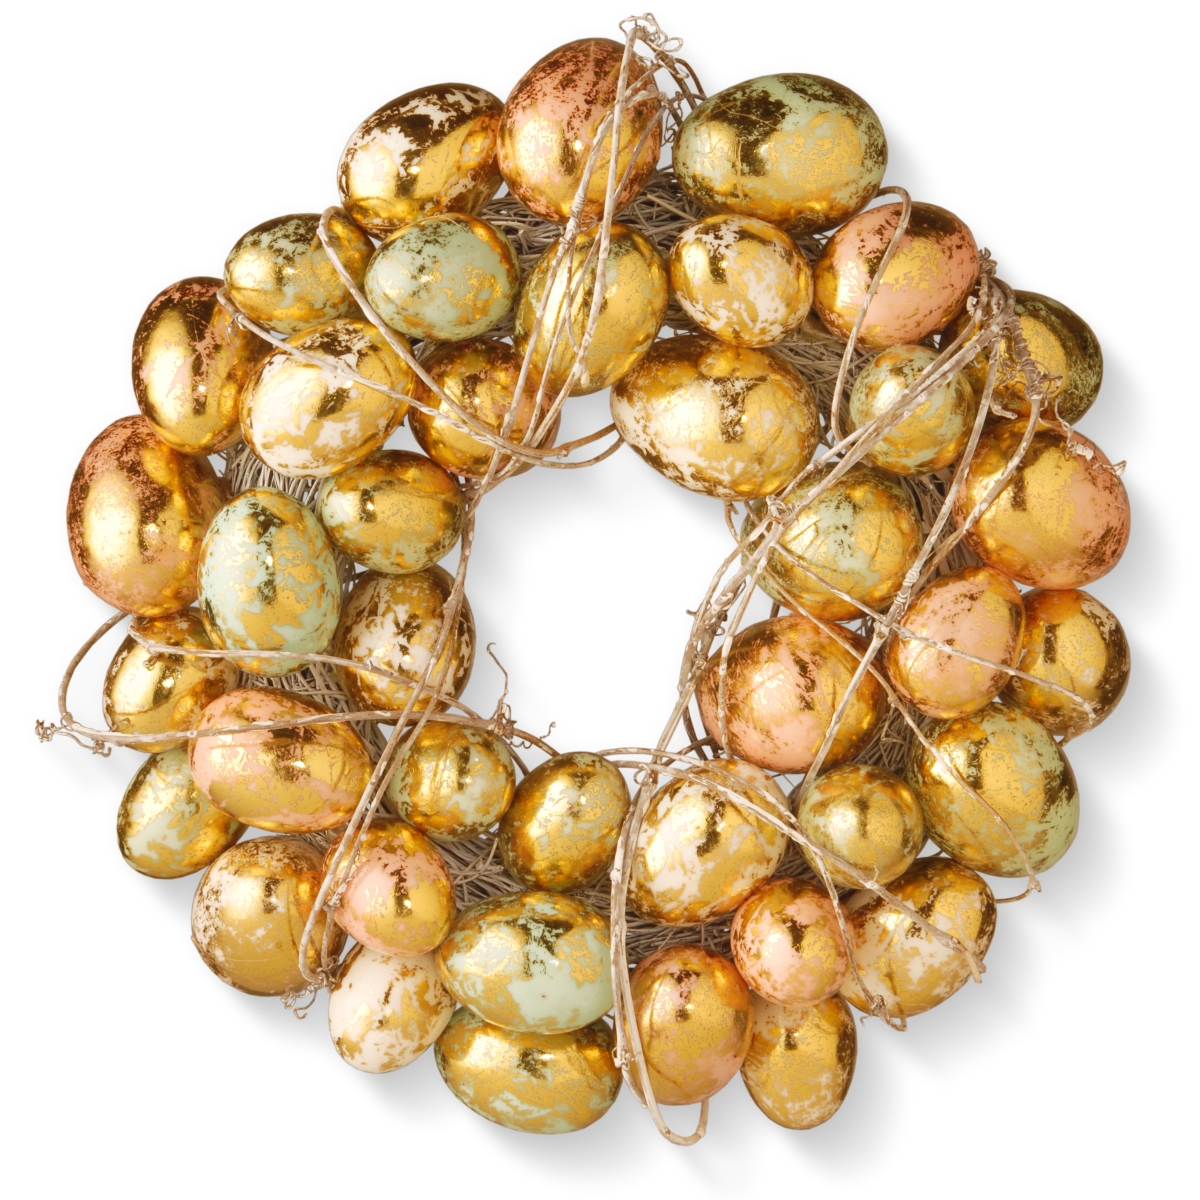 12 In. Egg Wreath With Gold & Pearl Eggs